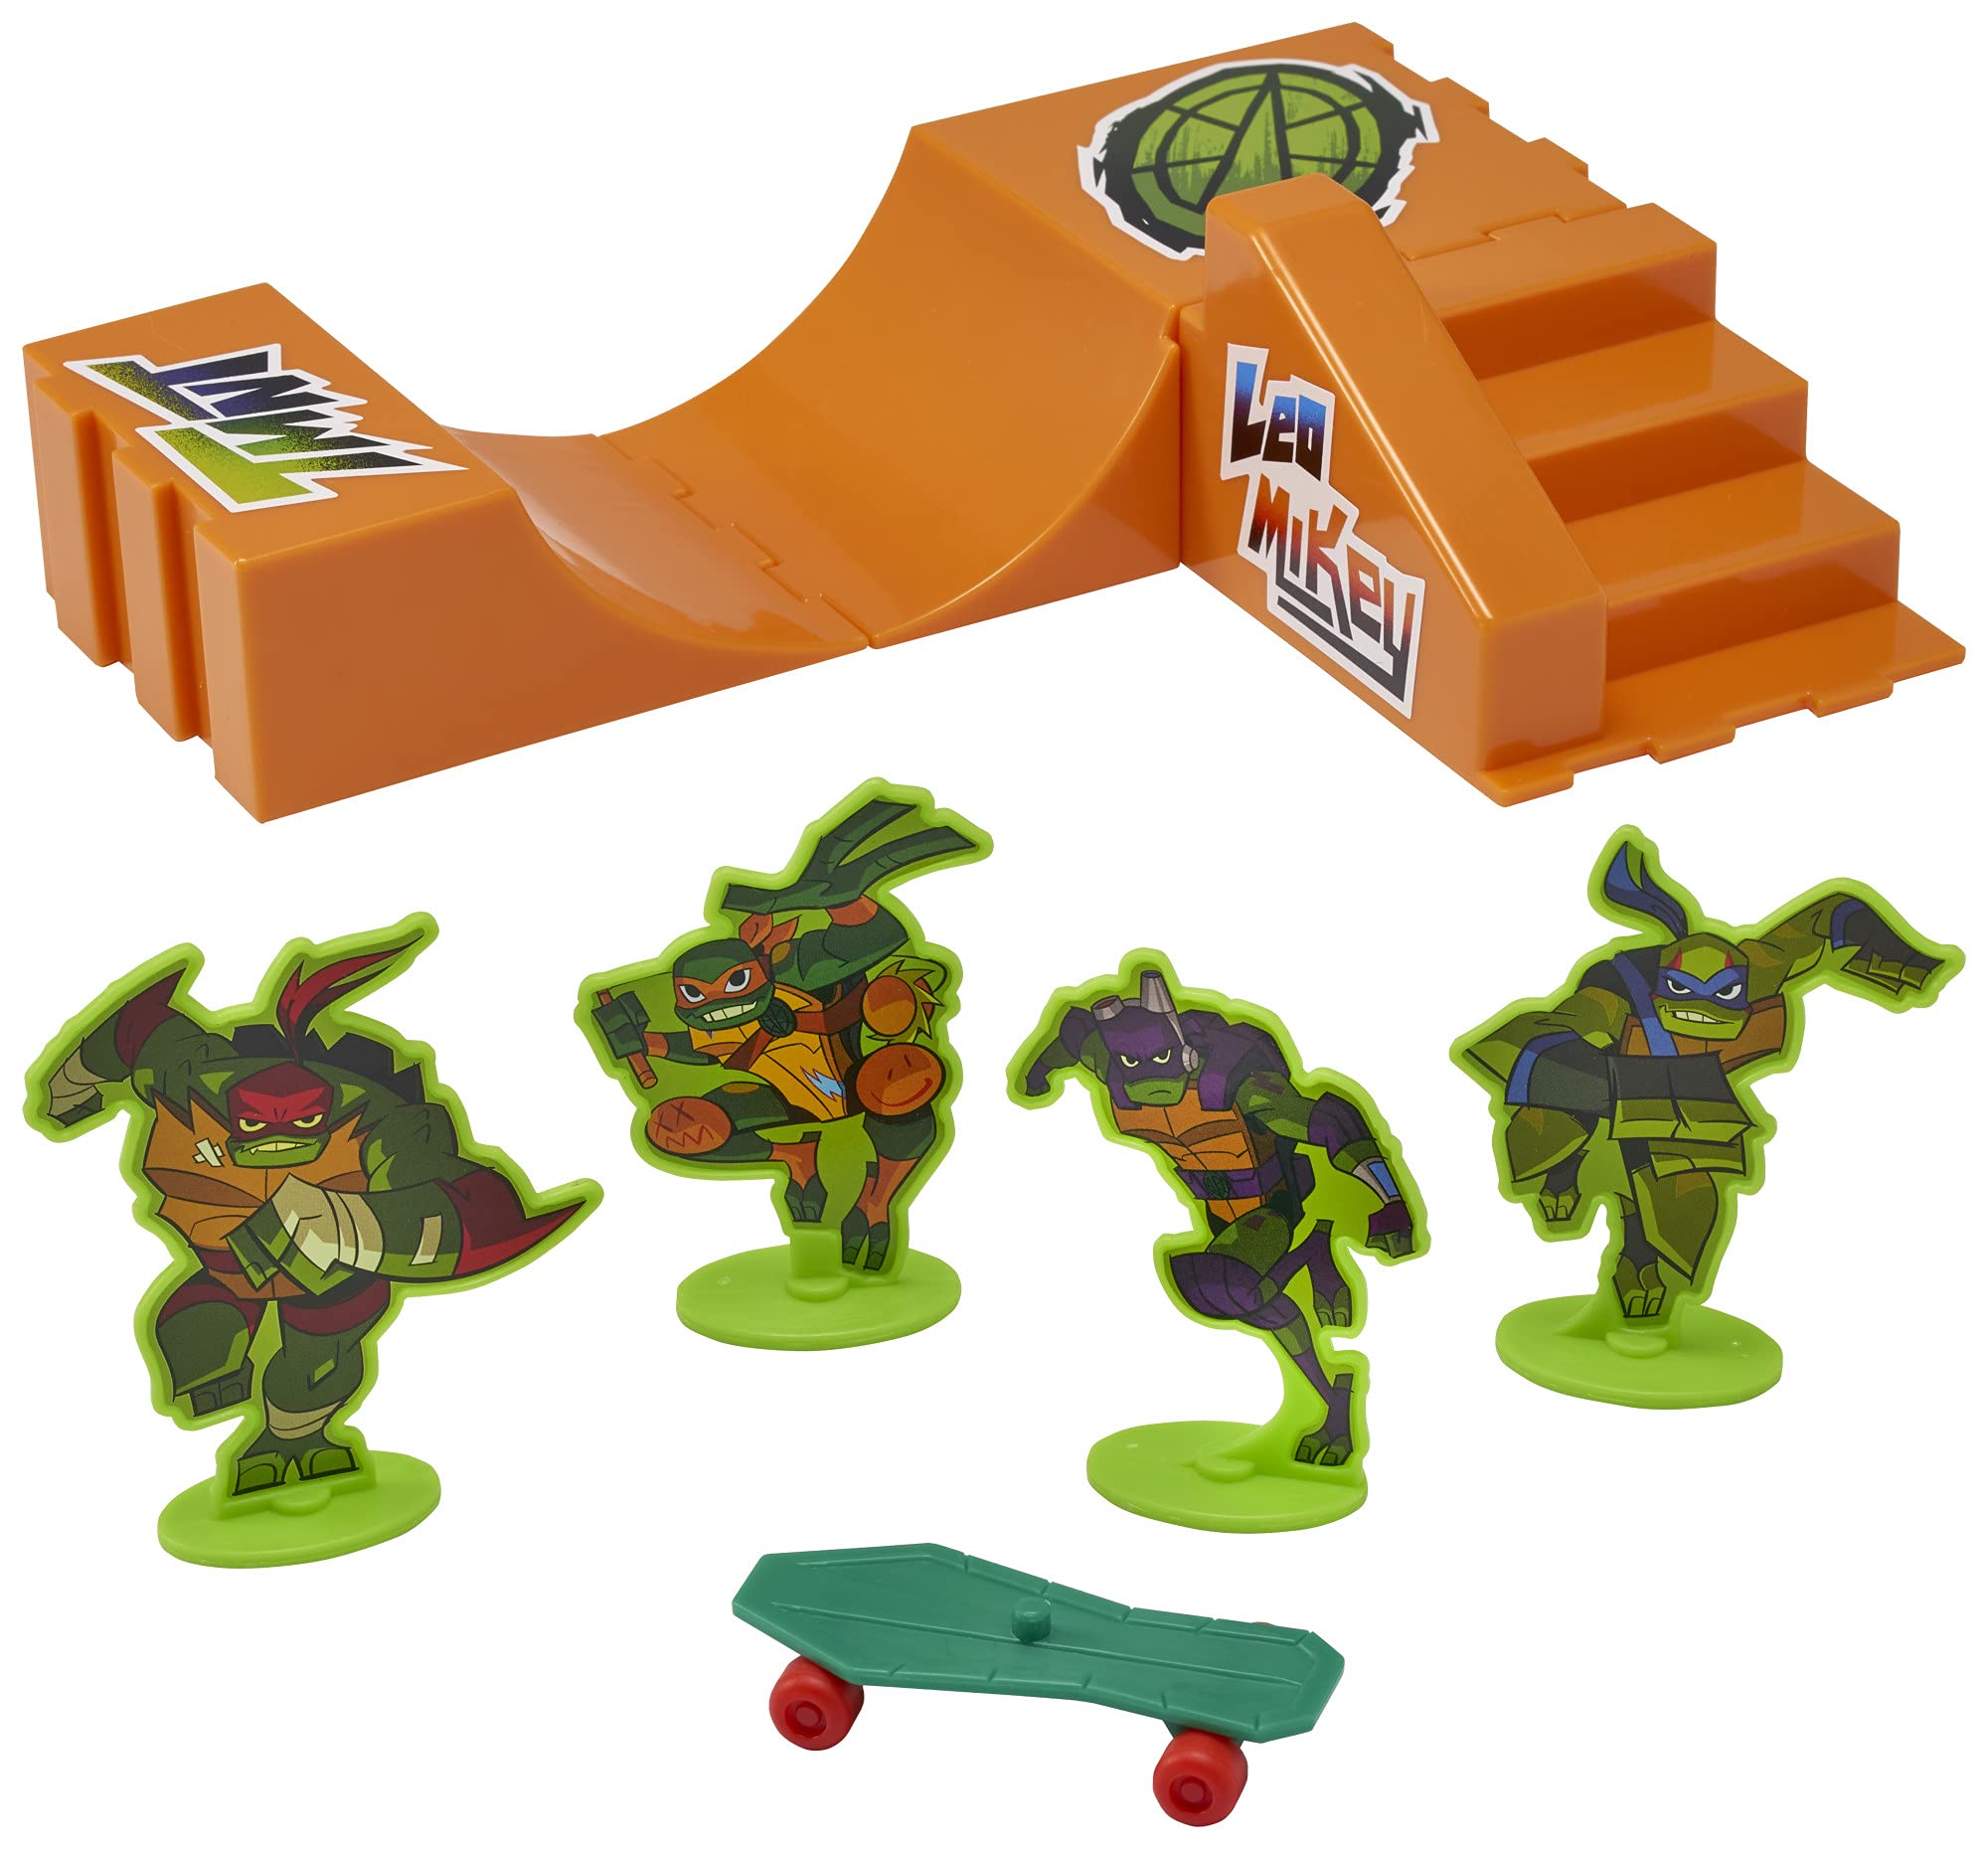 DecoSet® Teenage Mutant Ninja Turtles TMNT-RISE UP! Cake Topper, 6-Piece Birthday Decoration for Cakes and Cupcakes, Surprise Your TMNT Fan with ALL the Characters and Interactive Skateboard